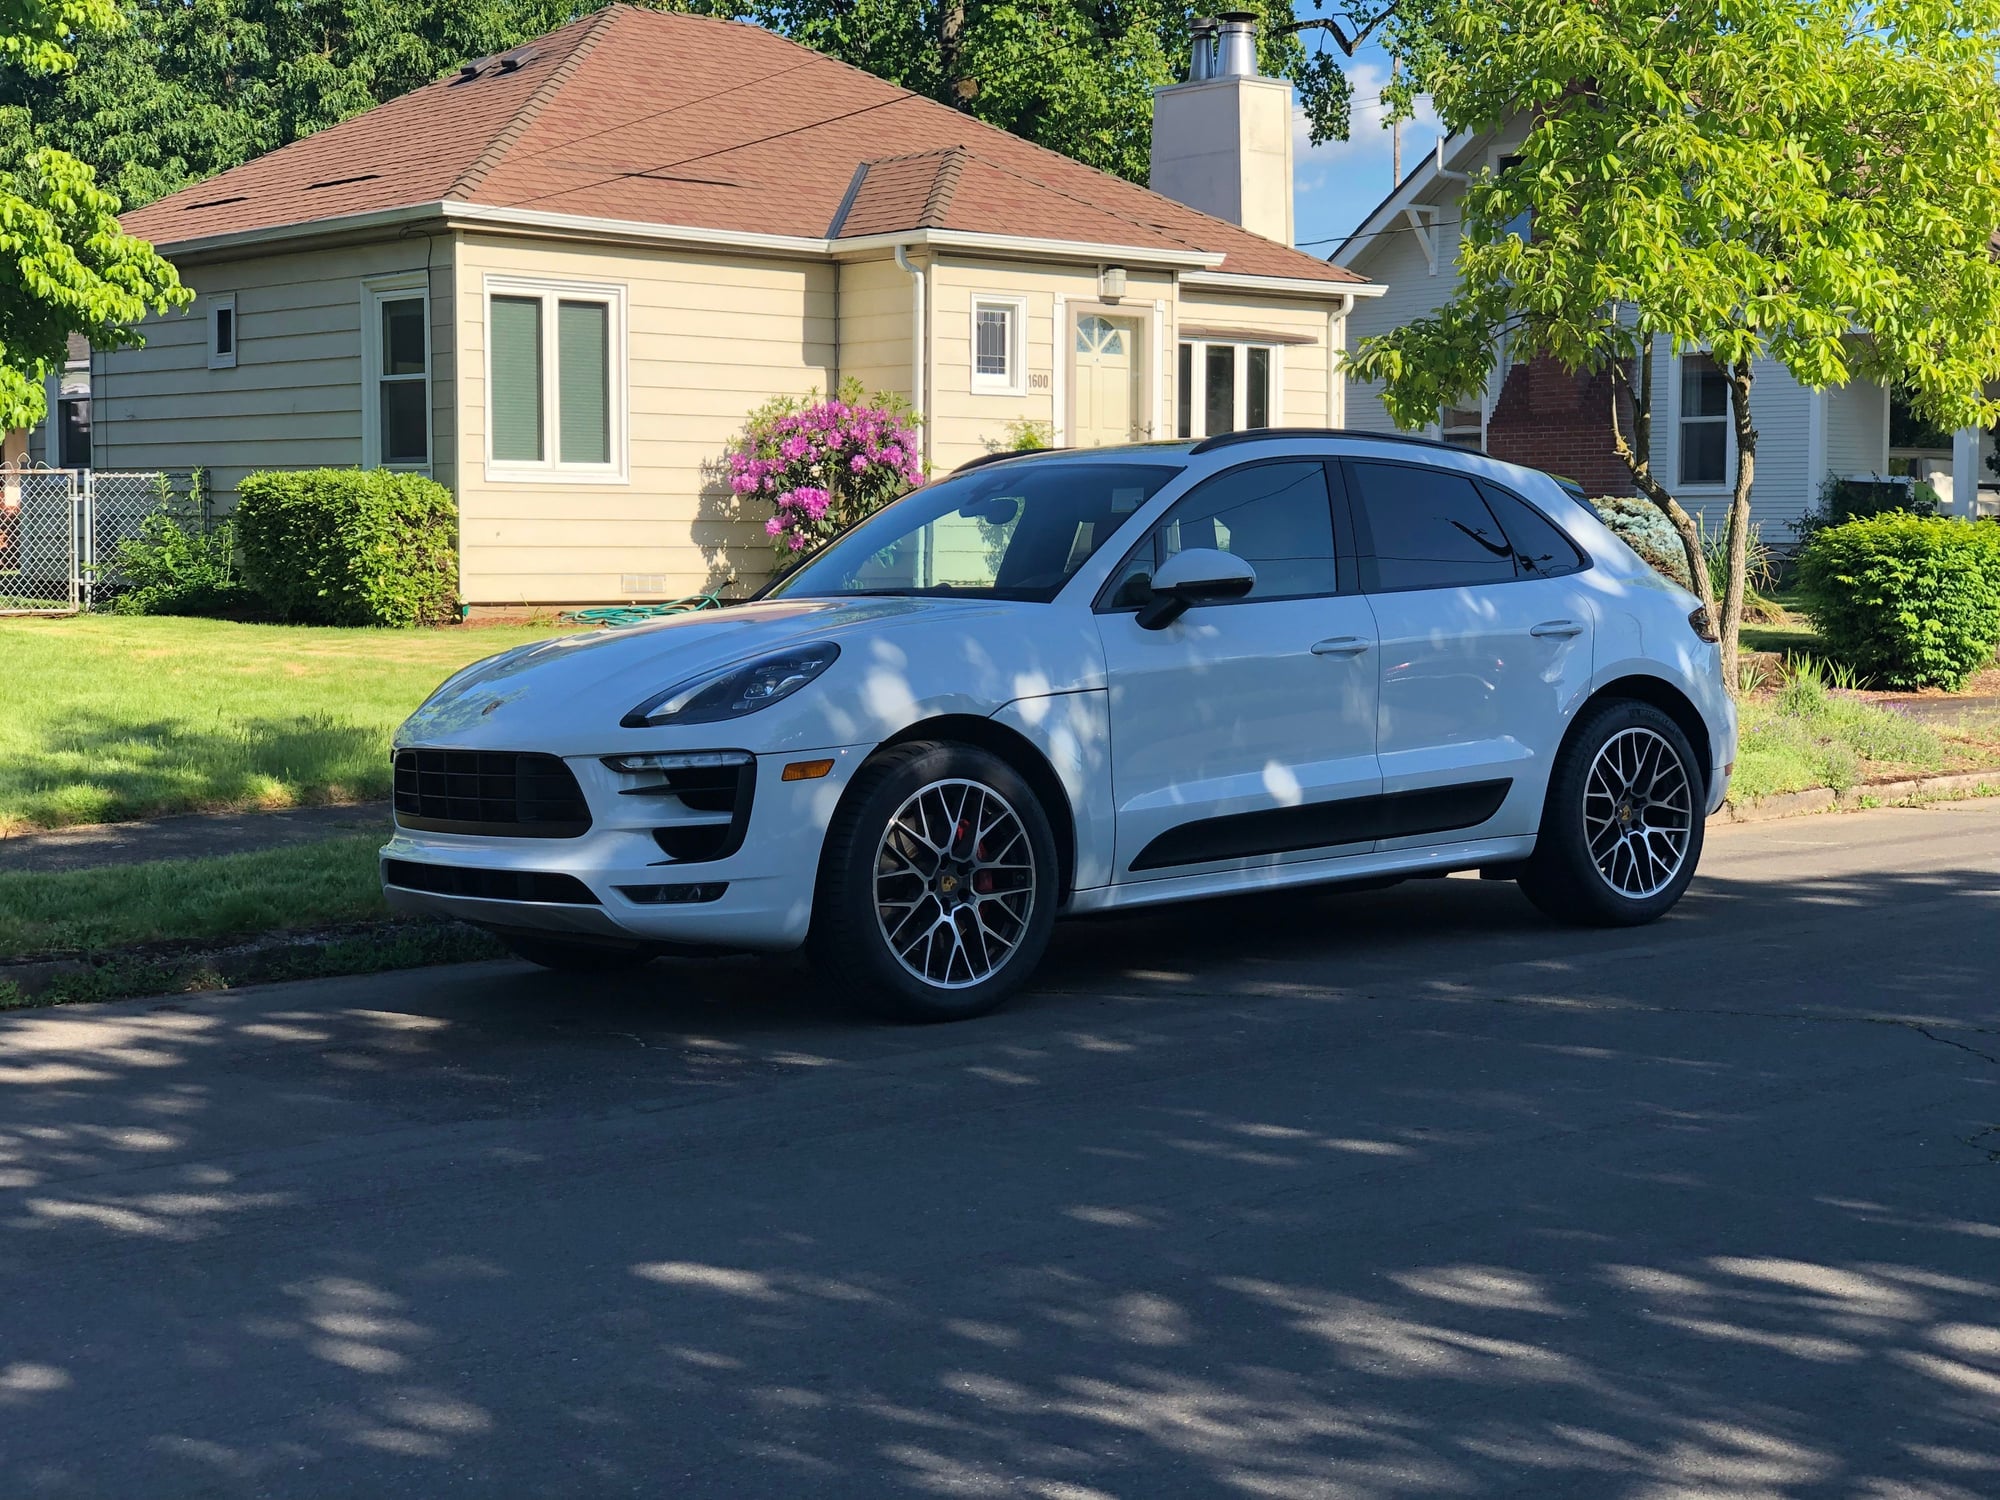 2017 Porsche Macan - Carrera White 2017 Macan GTS for sale - Used - VIN WP1AG2A5XHLB51961 - 34,000 Miles - 6 cyl - AWD - Automatic - SUV - White - Portland, OR 97213, United States